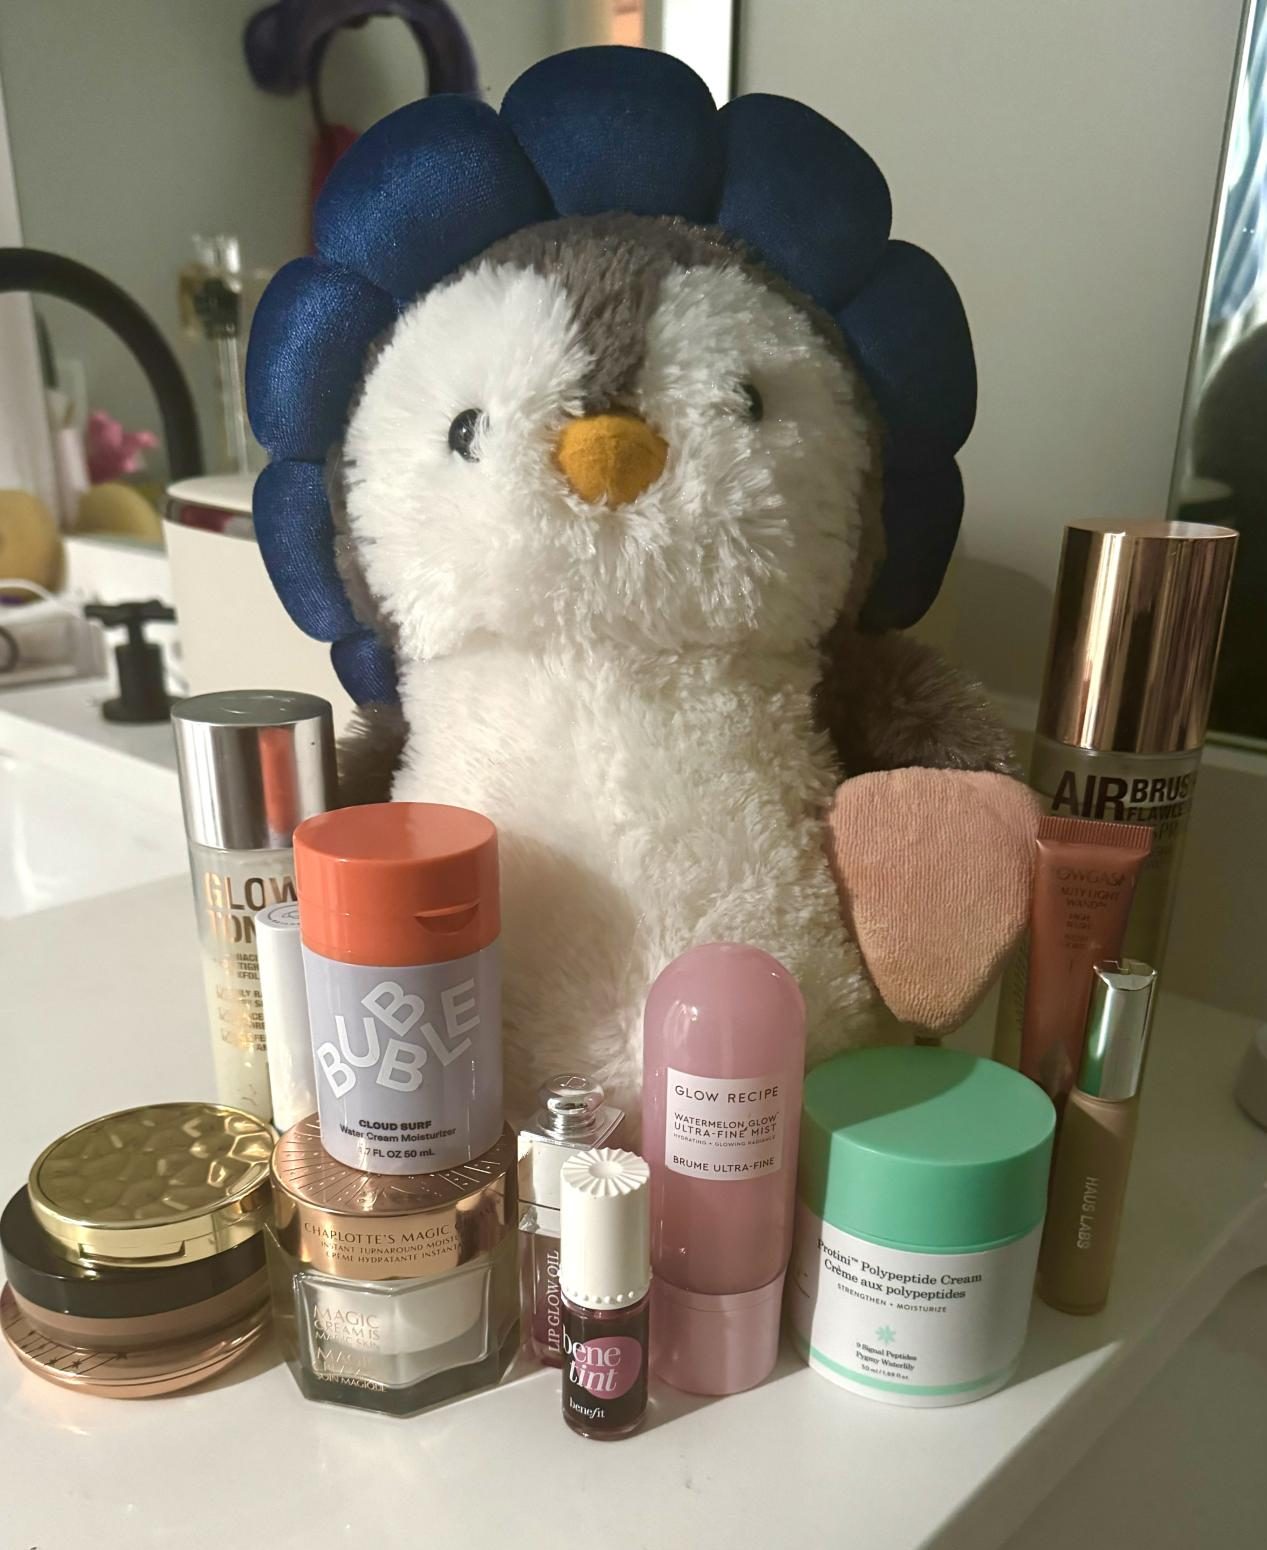 A stuffed animal surrounded by overpriced beauty products commonly owned by pre-teens